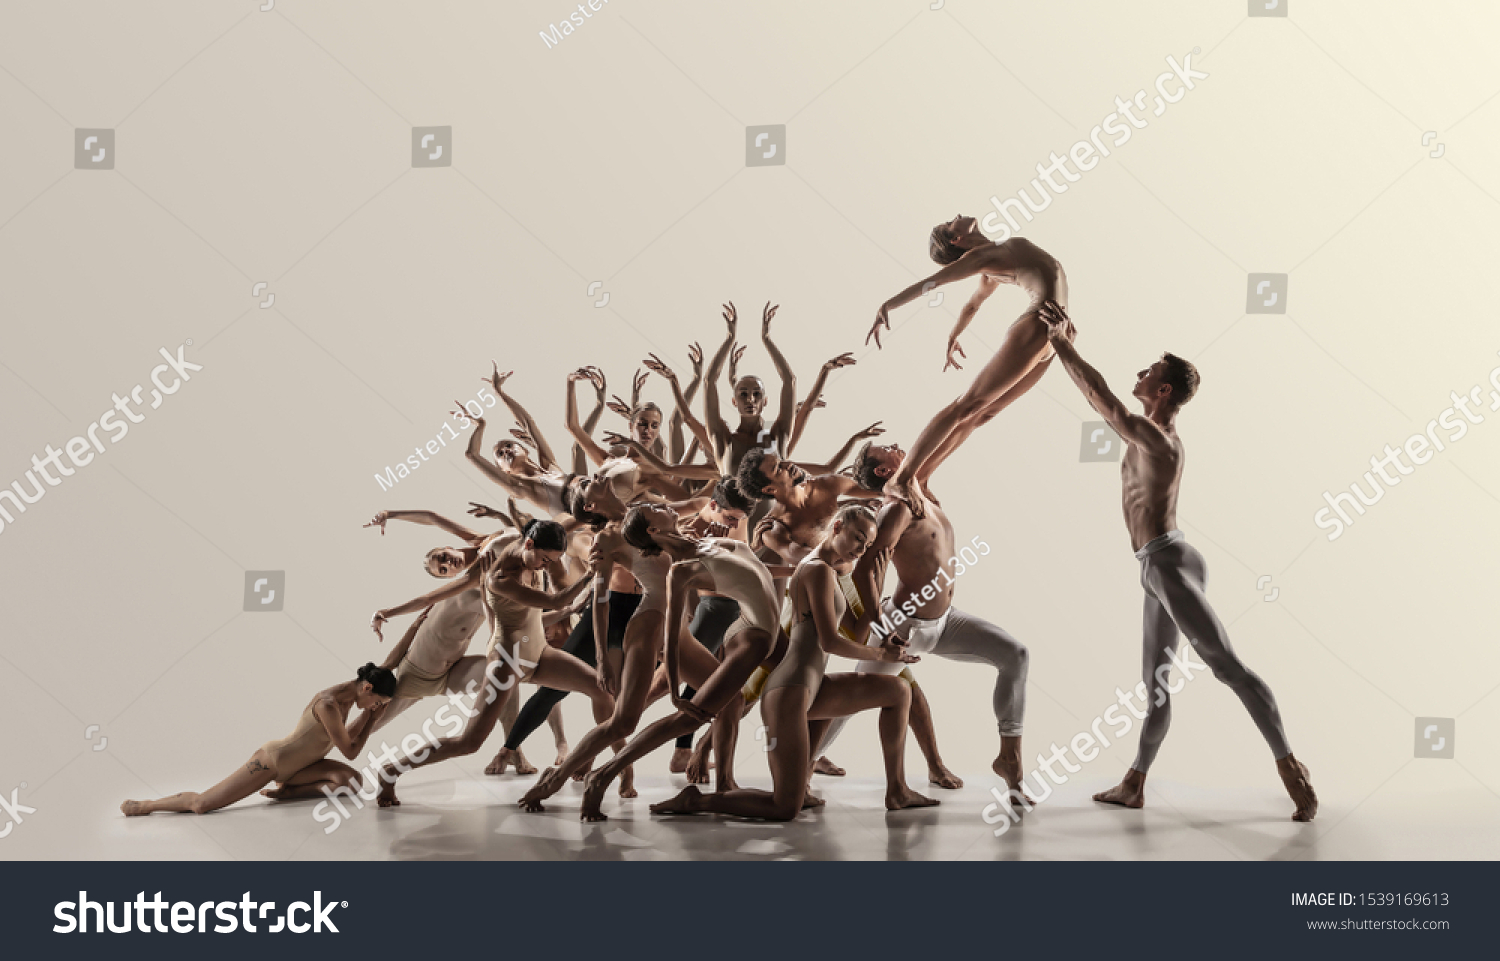 Support. Group of modern ballet dancers. Contemporary art. Young flexible athletic men and women in tights. Negative space. Concept of dance grace, inspiration, creativity. Made of shots of 11 models. #1539169613